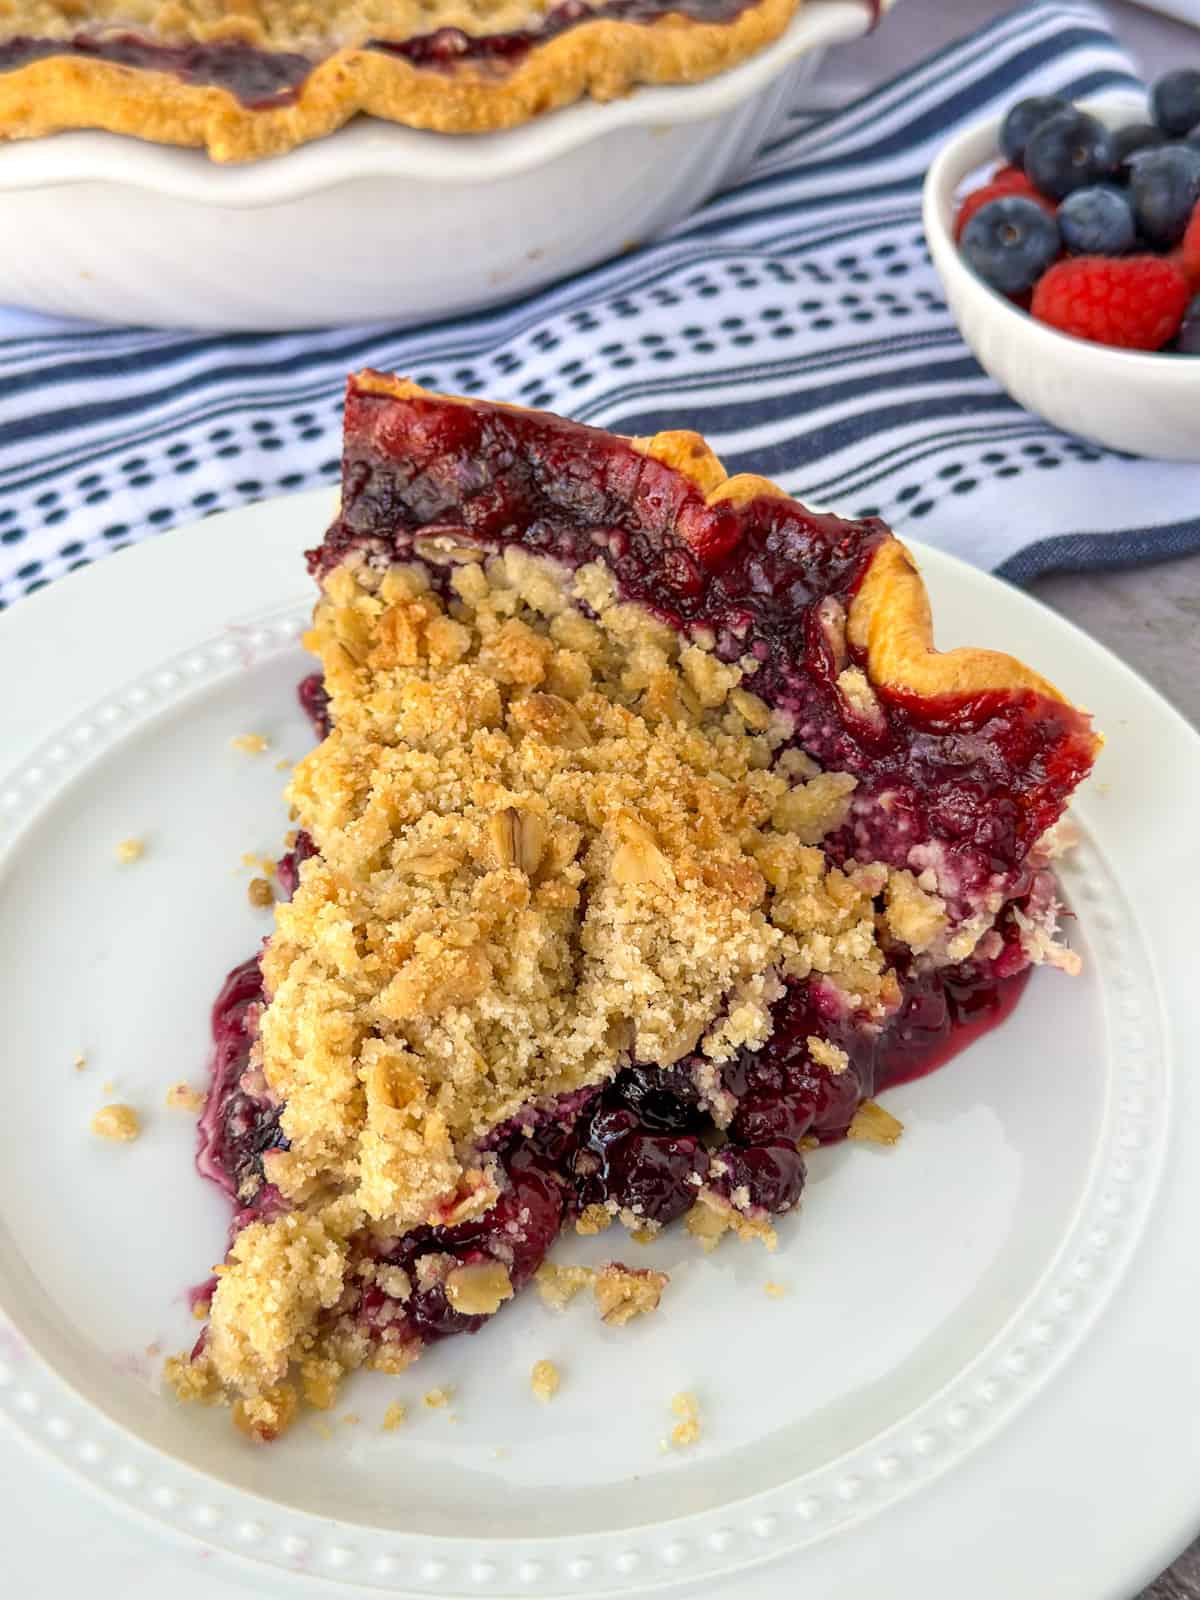 slice of mixed berry pie with oatmeal crumb topping on a plate with a pie in the background and a bowl of berries